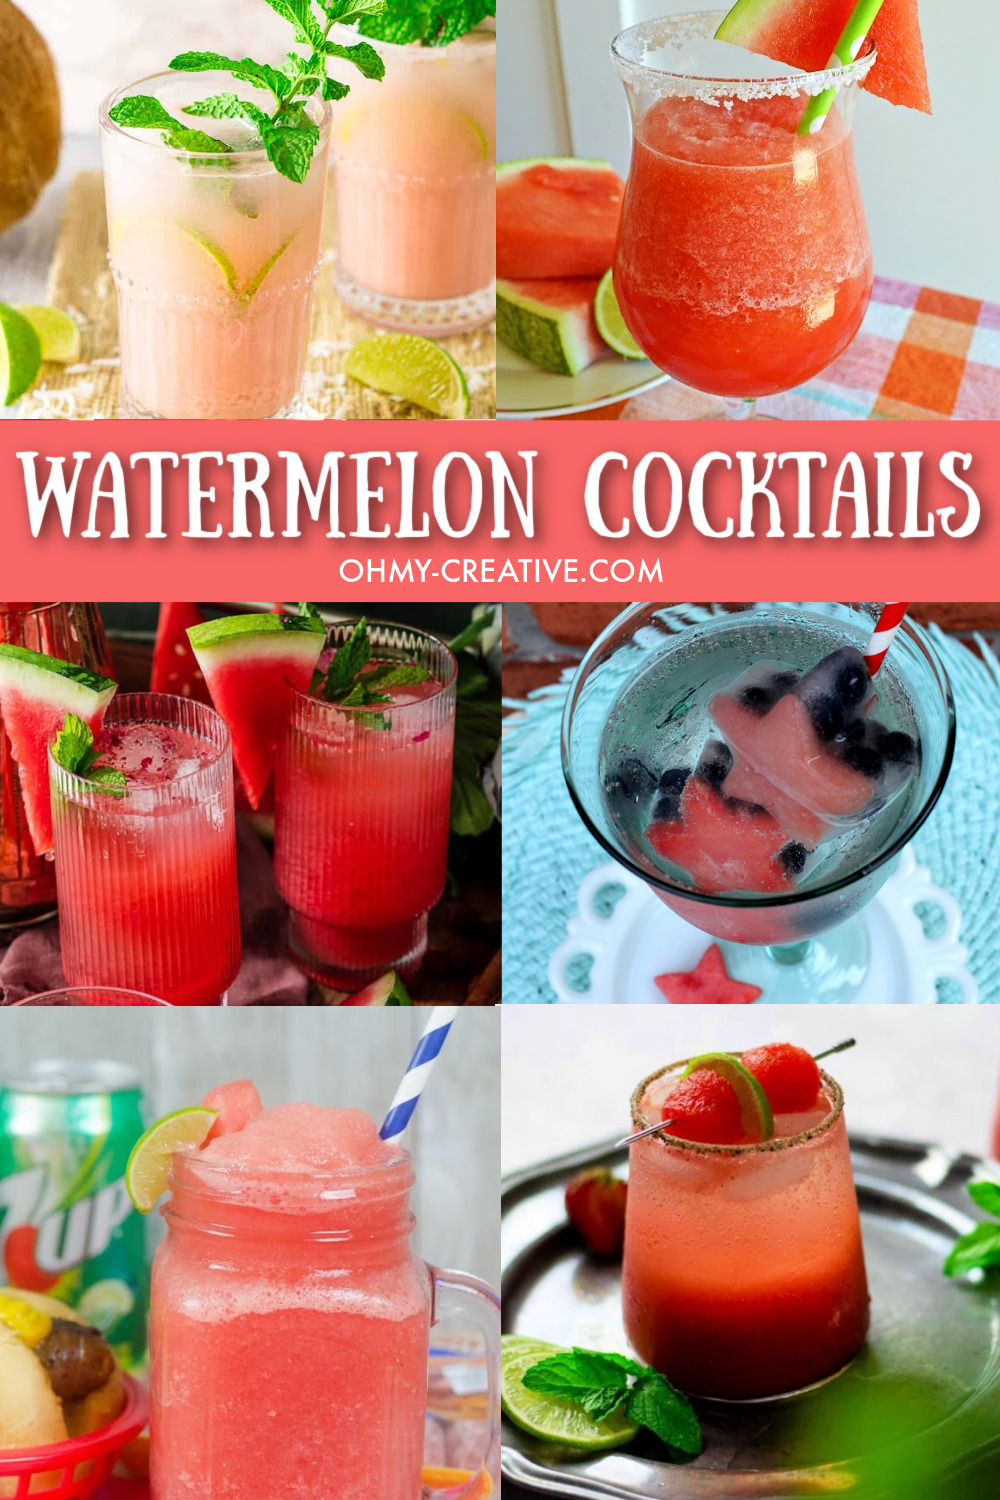 Here is a great collage of watermelon cocktails to enjoy all summer long including watermelon margaritas and watermelon vodka drinks!